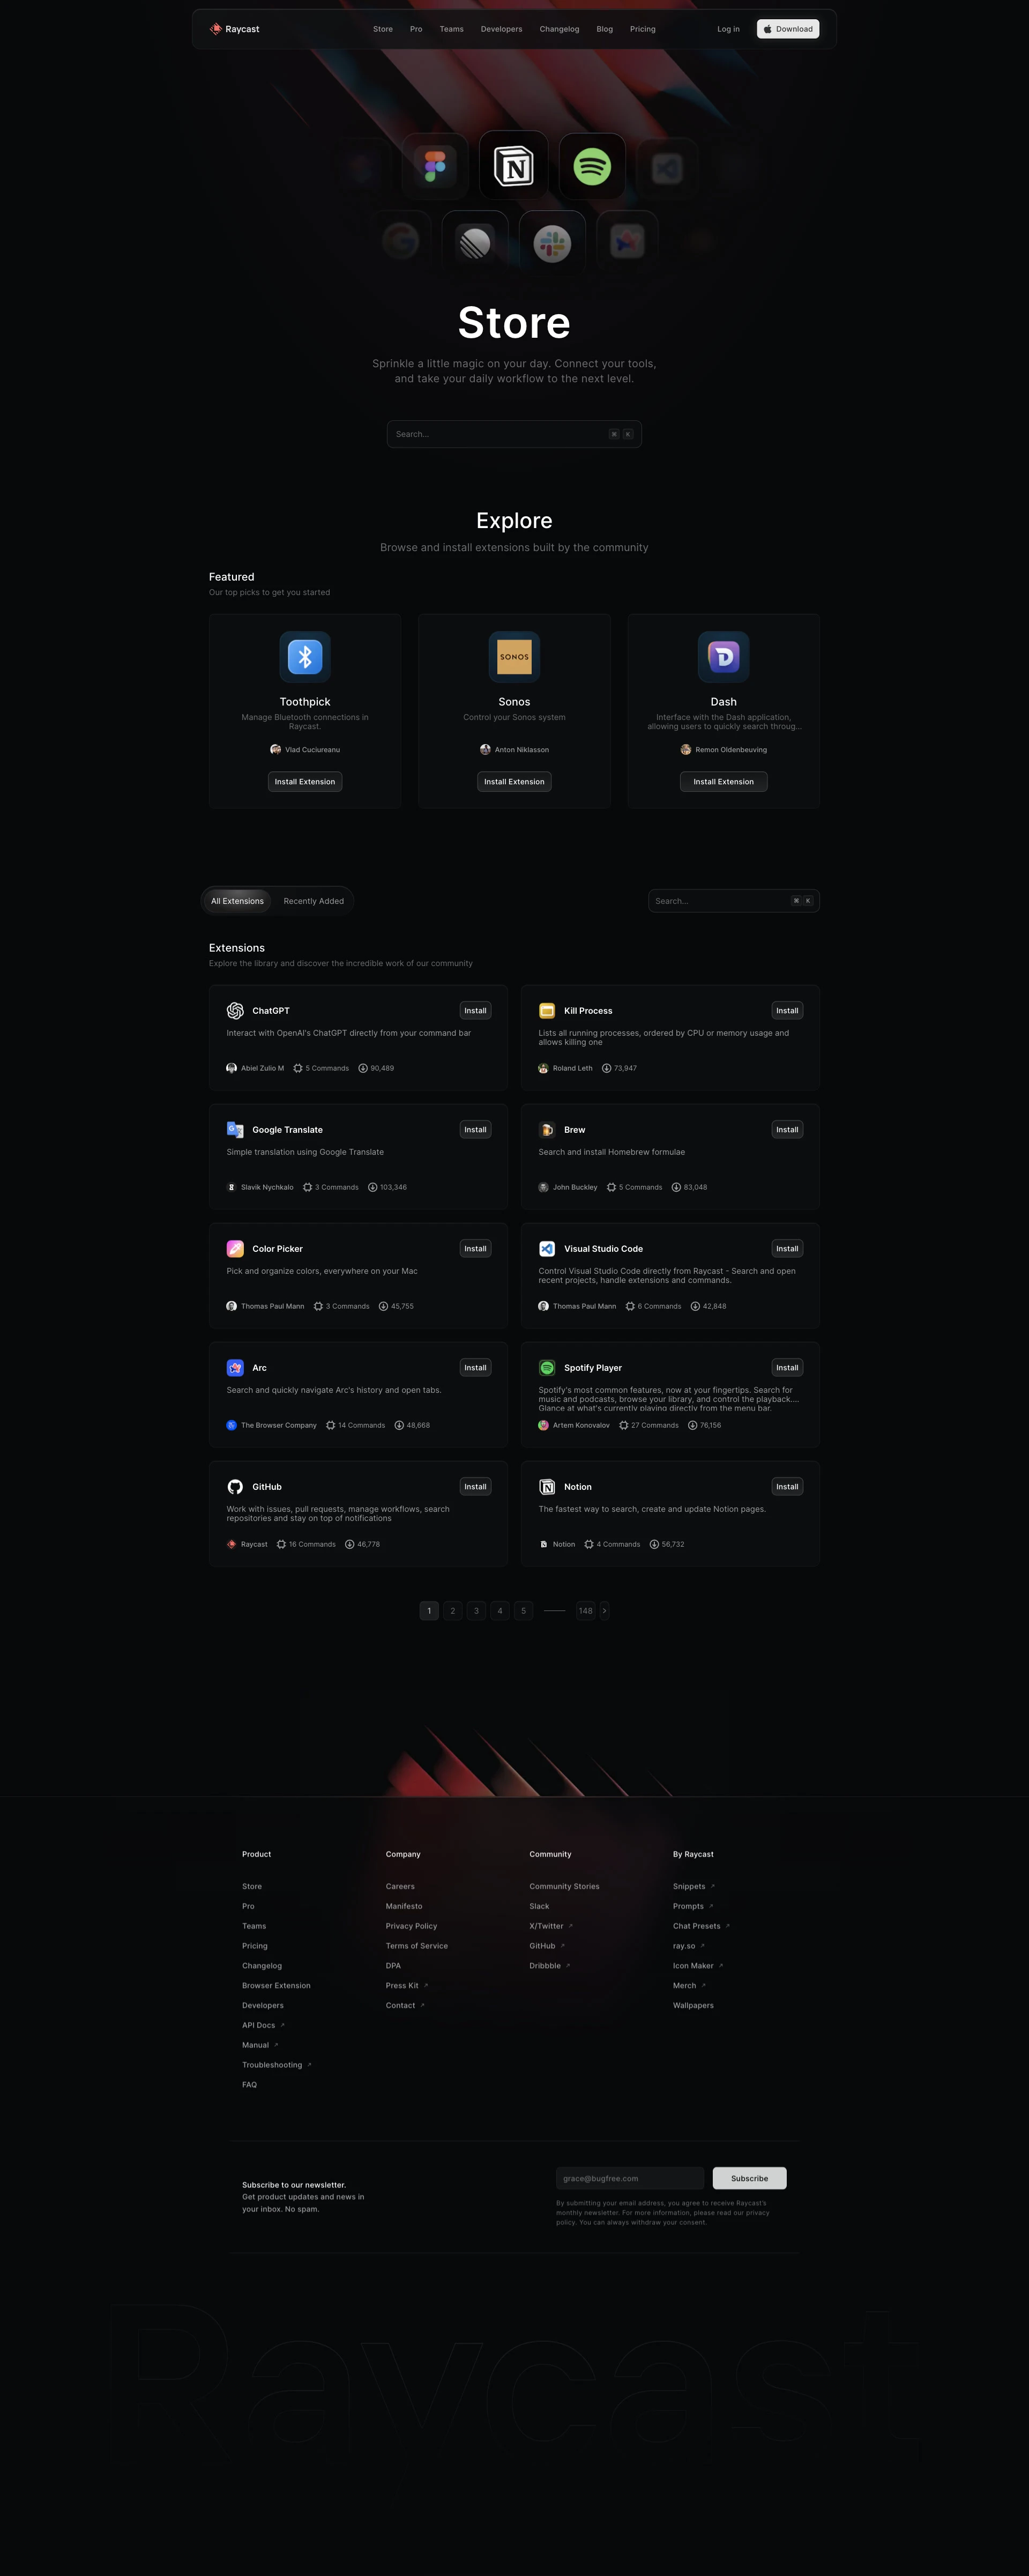 Raycast Landing Page Example: Your shortcut to everything. A collection of powerful productivity tools all within an extendable launcher. Fast, ergonomic and reliable.